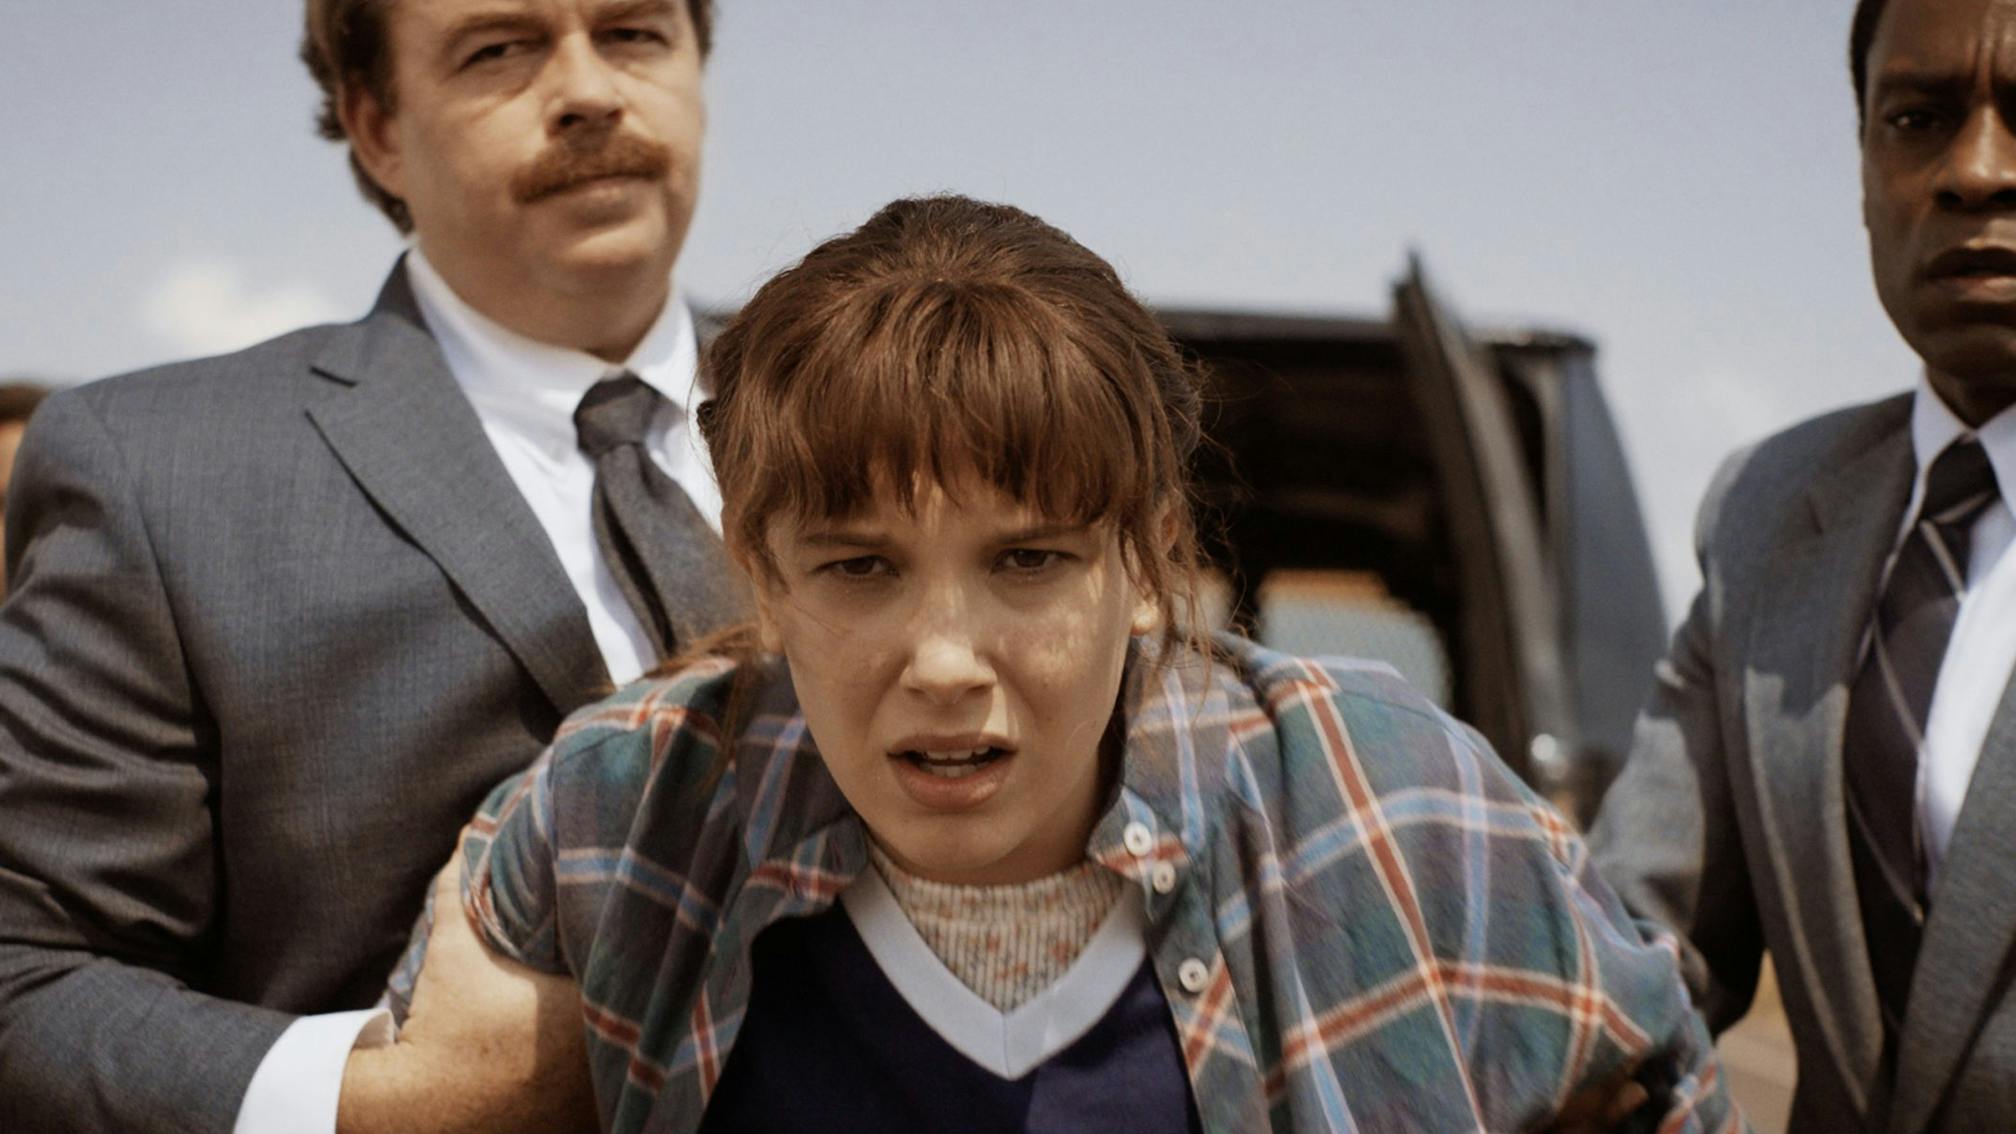 "It is almost here": Stranger Things 4 drops new teaser and confirms 2022 release